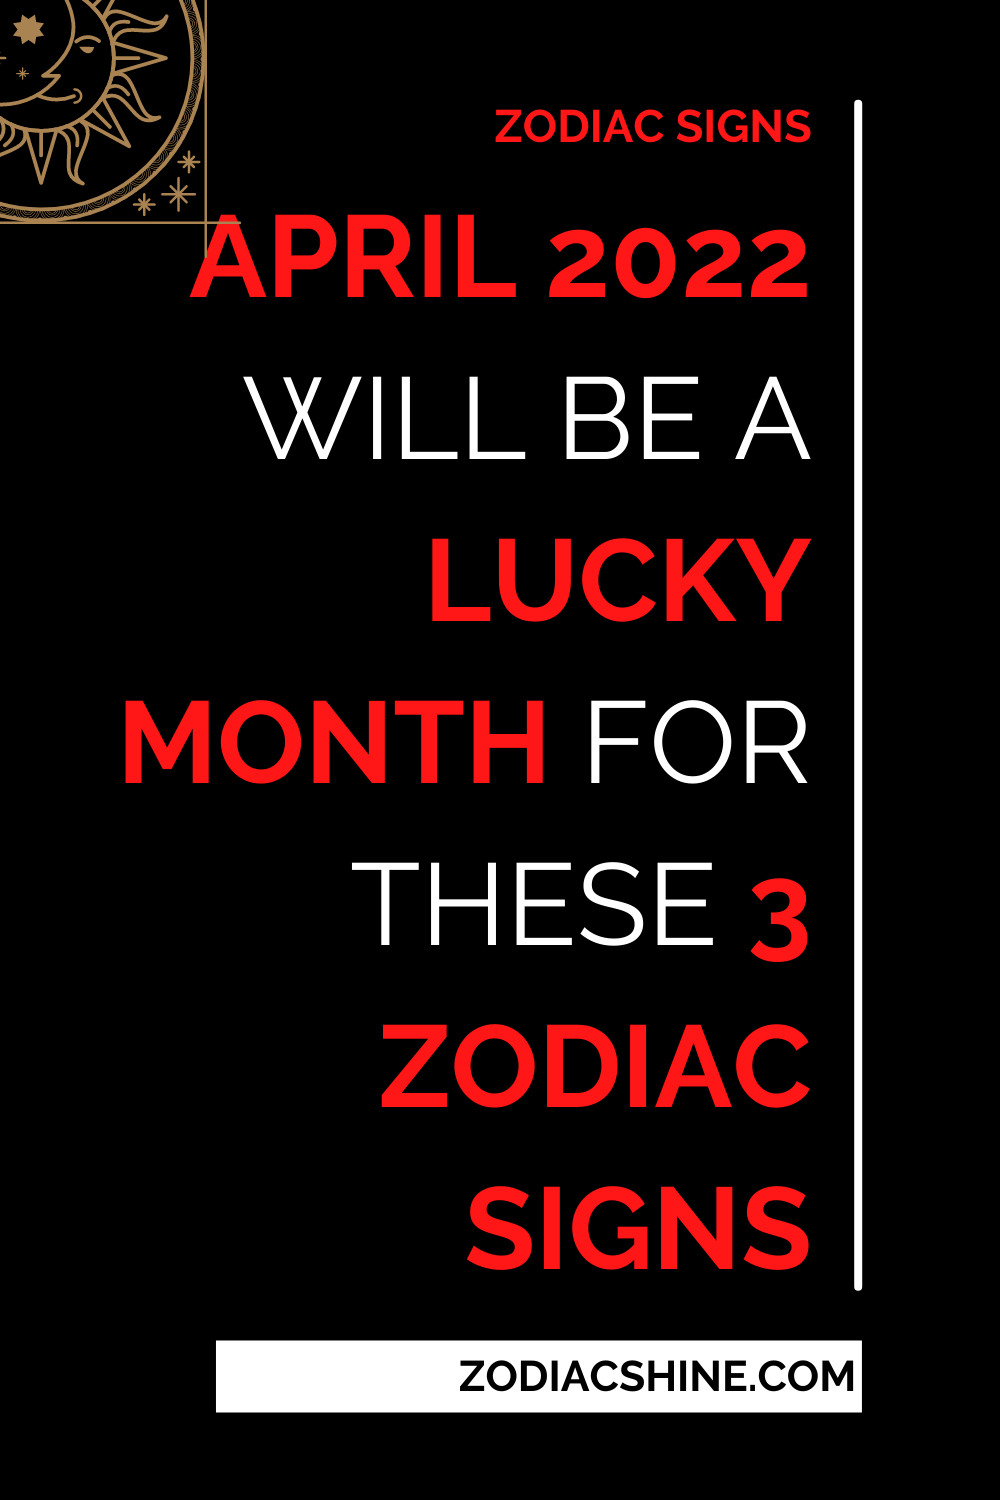 April 2022 Will Be A Lucky Month For These 3 Zodiac Signs